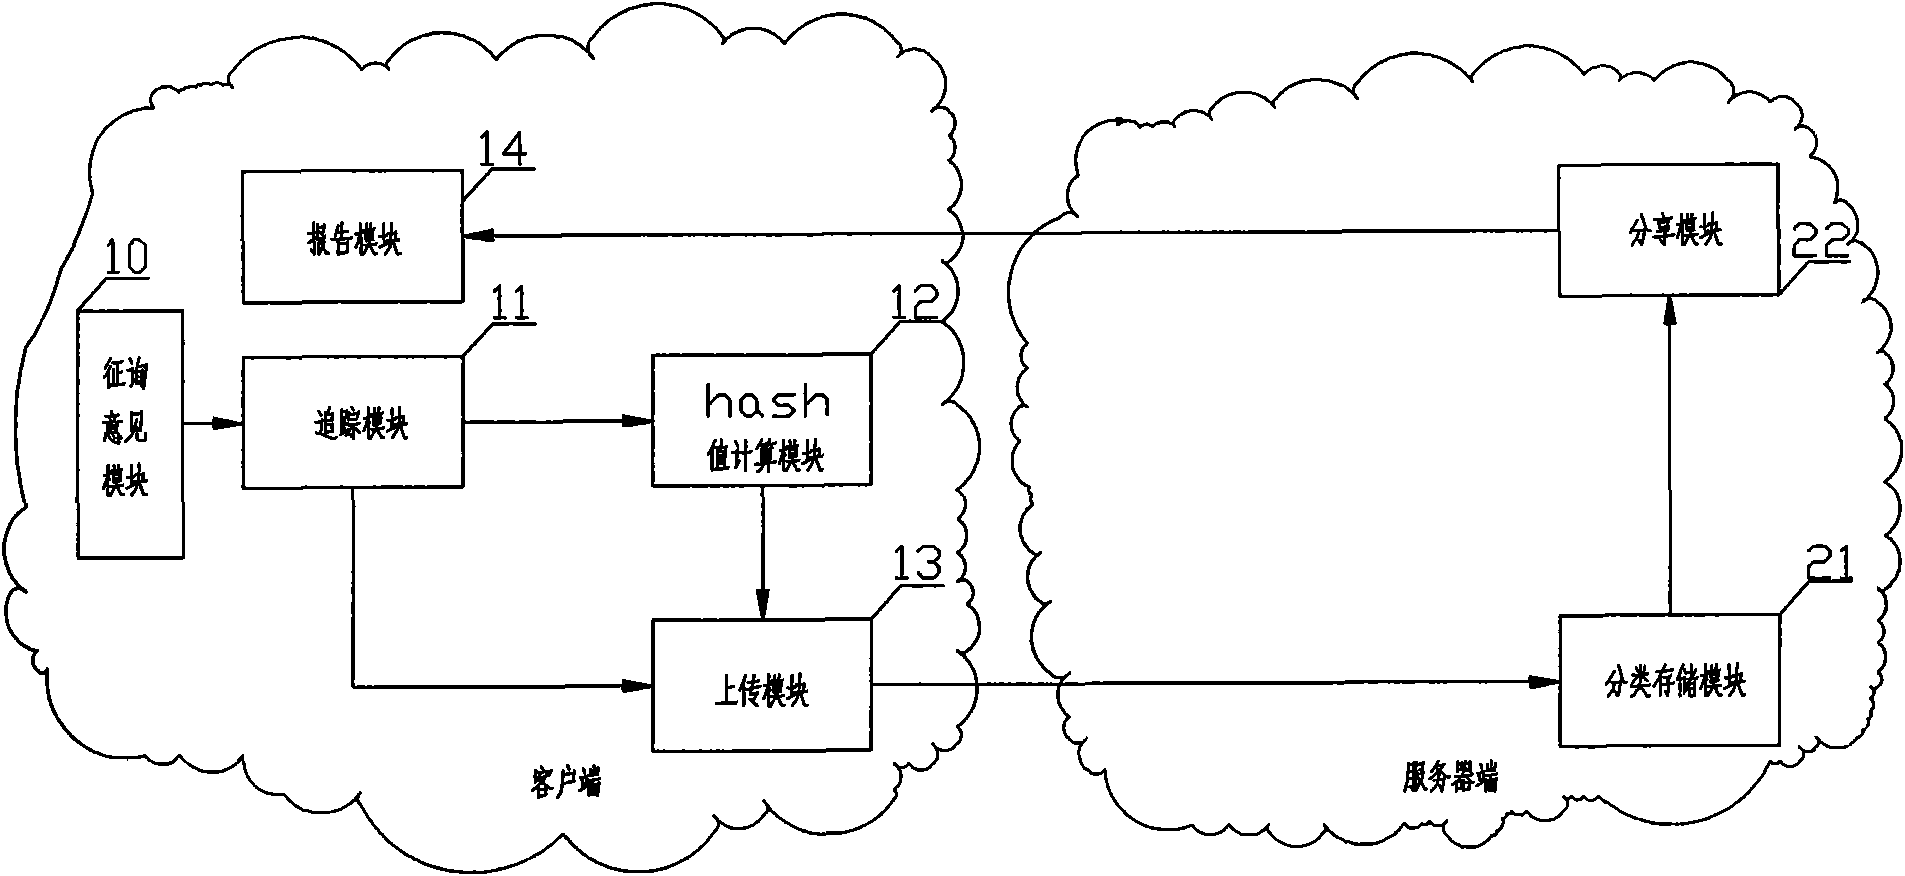 Operating record tracing system and method based on cloud computing